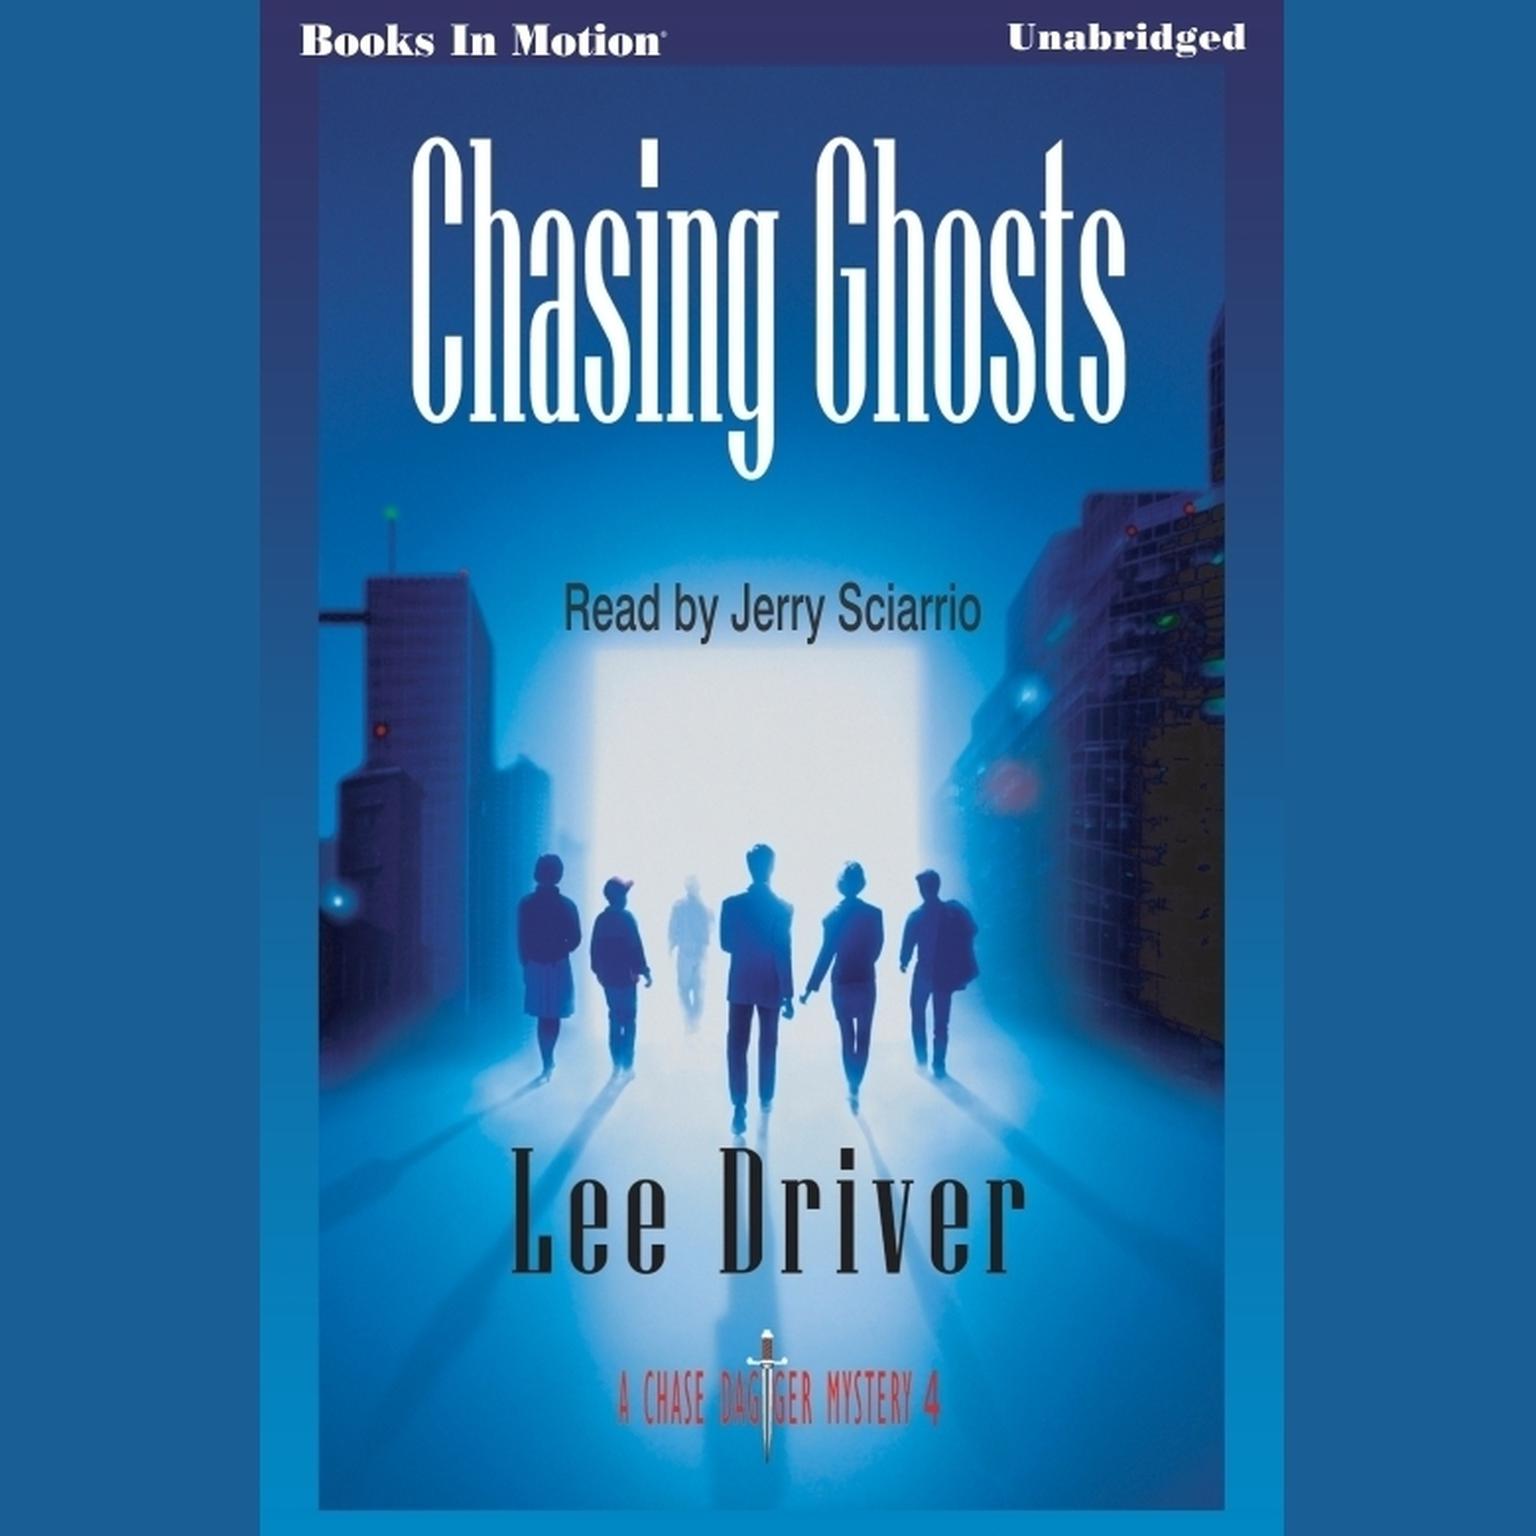 Chasing Ghosts Audiobook, by Lee Driver